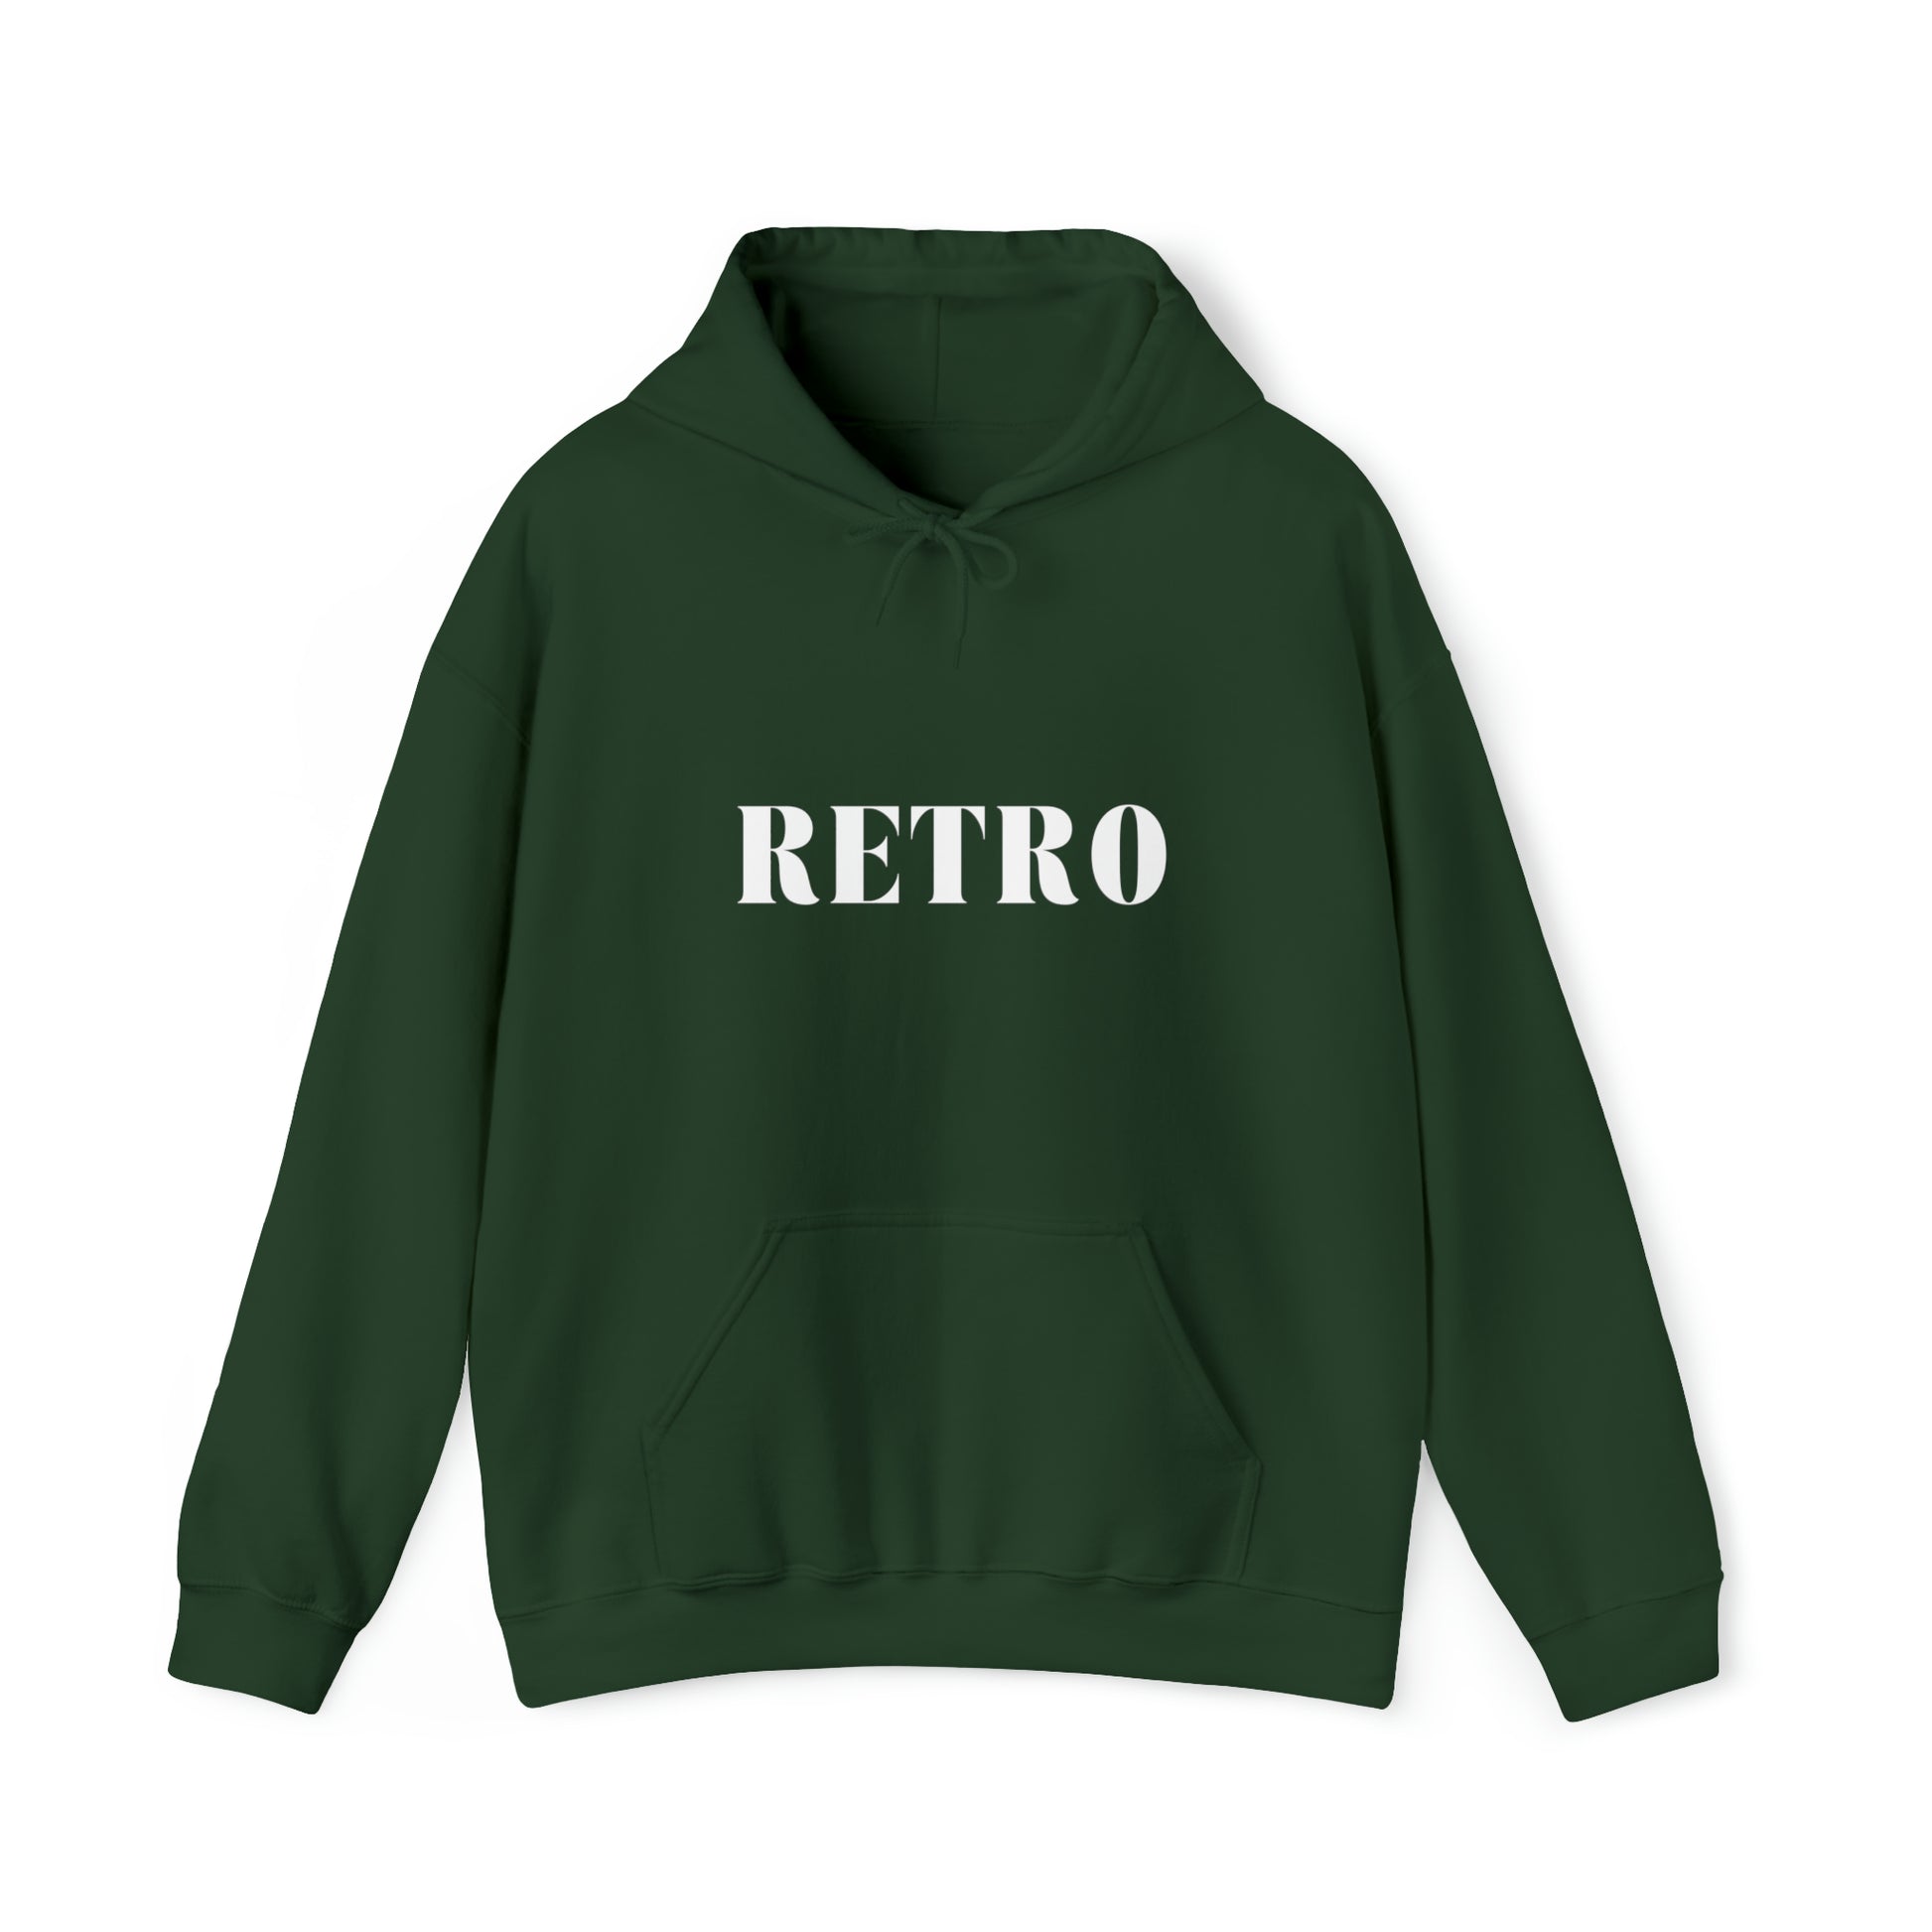 S Forest Green Retro Hoodie from HoodySZN.com